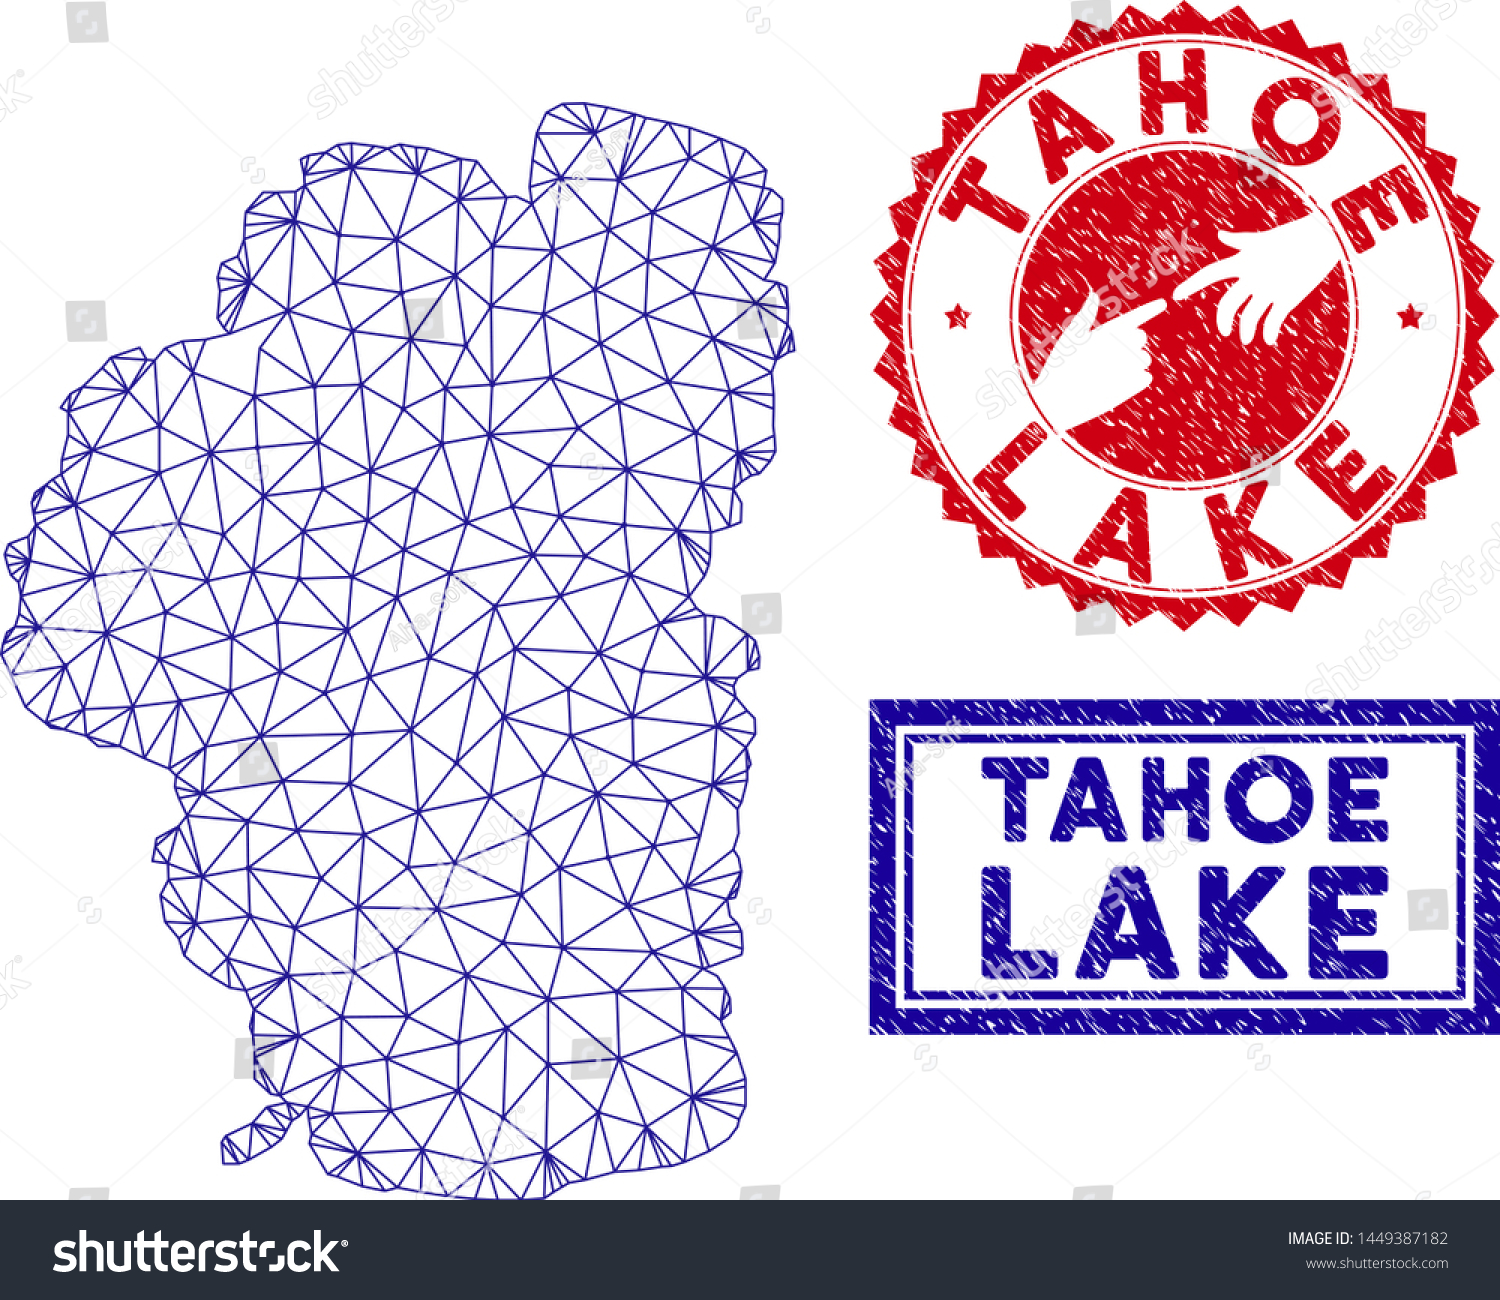 SVG of Network polygonal Tahoe Lake map and grunge seal stamps. Abstract lines and small circles form Tahoe Lake map vector model. Round red stamp with connecting hands. svg